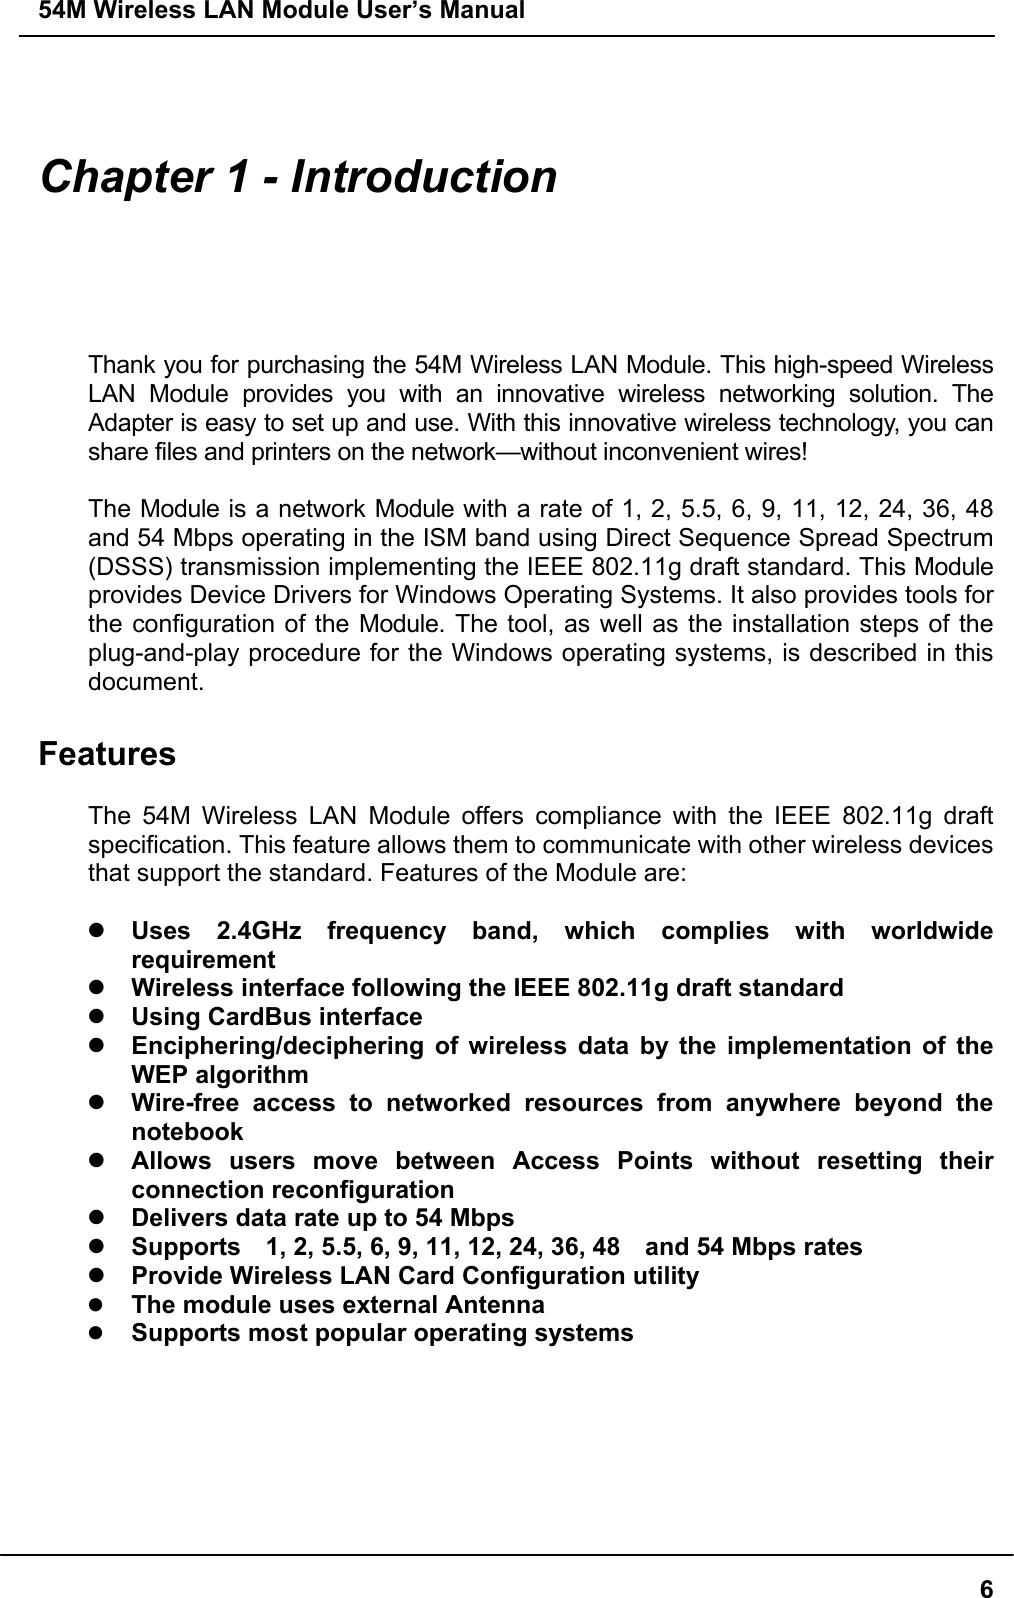 54M Wireless LAN Module User’s Manual6Chapter 1 - IntroductionThank you for purchasing the 54M Wireless LAN Module. This high-speed WirelessLAN Module provides you with an innovative wireless networking solution. TheAdapter is easy to set up and use. With this innovative wireless technology, you canshare files and printers on the network—without inconvenient wires!The Module is a network Module with a rate of 1, 2, 5.5, 6, 9, 11, 12, 24, 36, 48and 54 Mbps operating in the ISM band using Direct Sequence Spread Spectrum(DSSS) transmission implementing the IEEE 802.11g draft standard. This Moduleprovides Device Drivers for Windows Operating Systems. It also provides tools forthe configuration of the Module. The tool, as well as the installation steps of theplug-and-play procedure for the Windows operating systems, is described in thisdocument.FeaturesThe 54M Wireless LAN Module offers compliance with the IEEE 802.11g draftspecification. This feature allows them to communicate with other wireless devicesthat support the standard. Features of the Module are:z Uses 2.4GHz frequency band, which complies with worldwiderequirementz Wireless interface following the IEEE 802.11g draft standardz Using CardBus interfacez Enciphering/deciphering of wireless data by the implementation of theWEP algorithmz Wire-free access to networked resources from anywhere beyond thenotebookz Allows users move between Access Points without resetting theirconnection reconfigurationz Delivers data rate up to 54 Mbpsz Supports    1, 2, 5.5, 6, 9, 11, 12, 24, 36, 48    and 54 Mbps ratesz Provide Wireless LAN Card Configuration utilityz The module uses external Antennaz Supports most popular operating systems